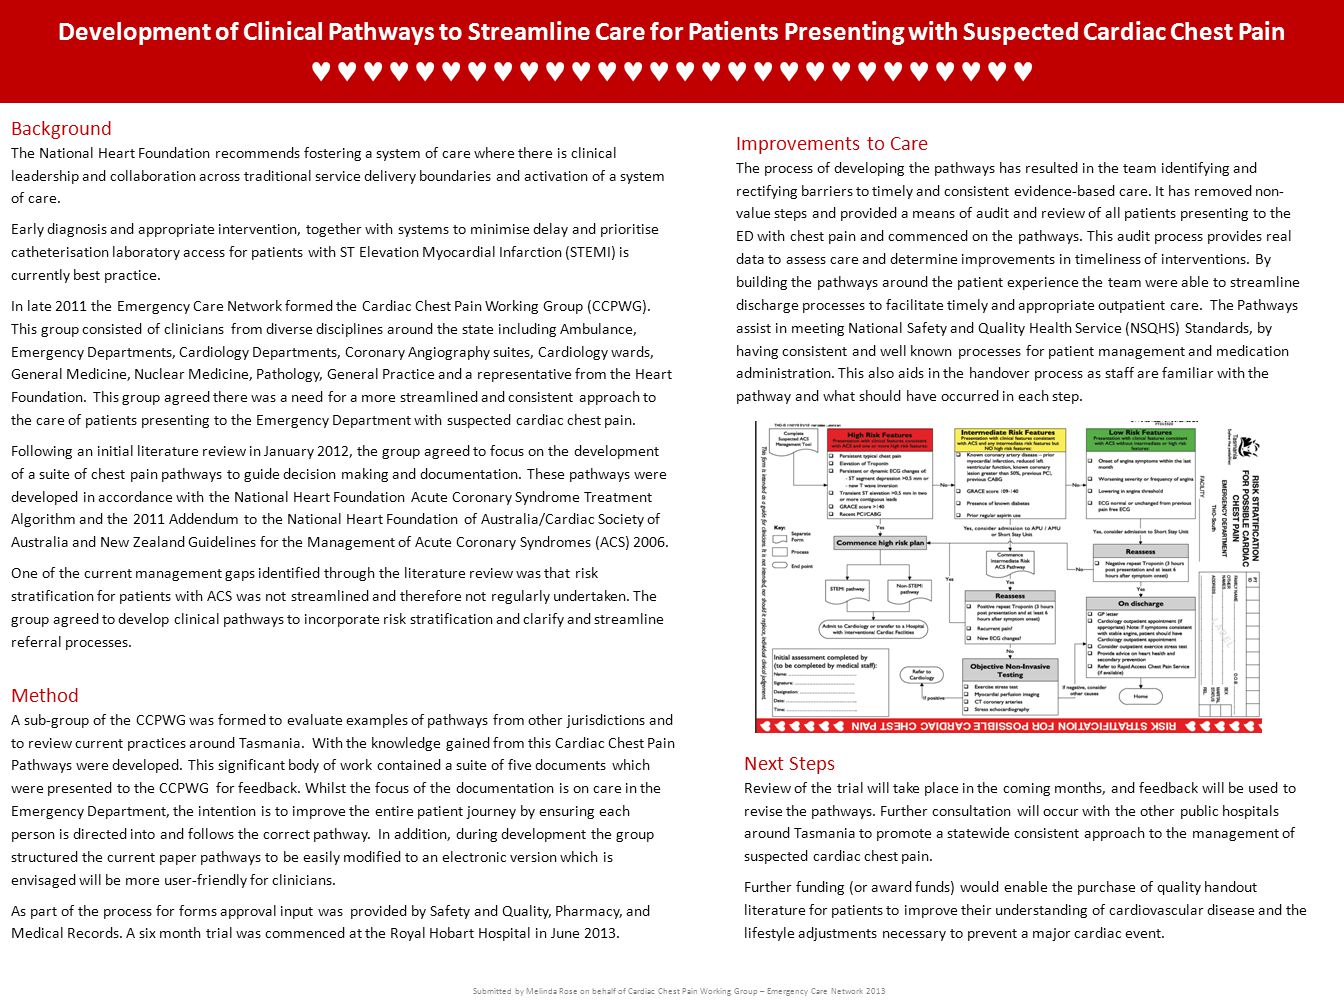 Development of Clinical Pathways to Streamline Care for Patients Presenting with Suspected Cardiac Chest Pain Background The National Heart Foundation recommends fostering a system of care where there is clinical leadership and collaboration across traditional service delivery boundaries and activation of a system of care.